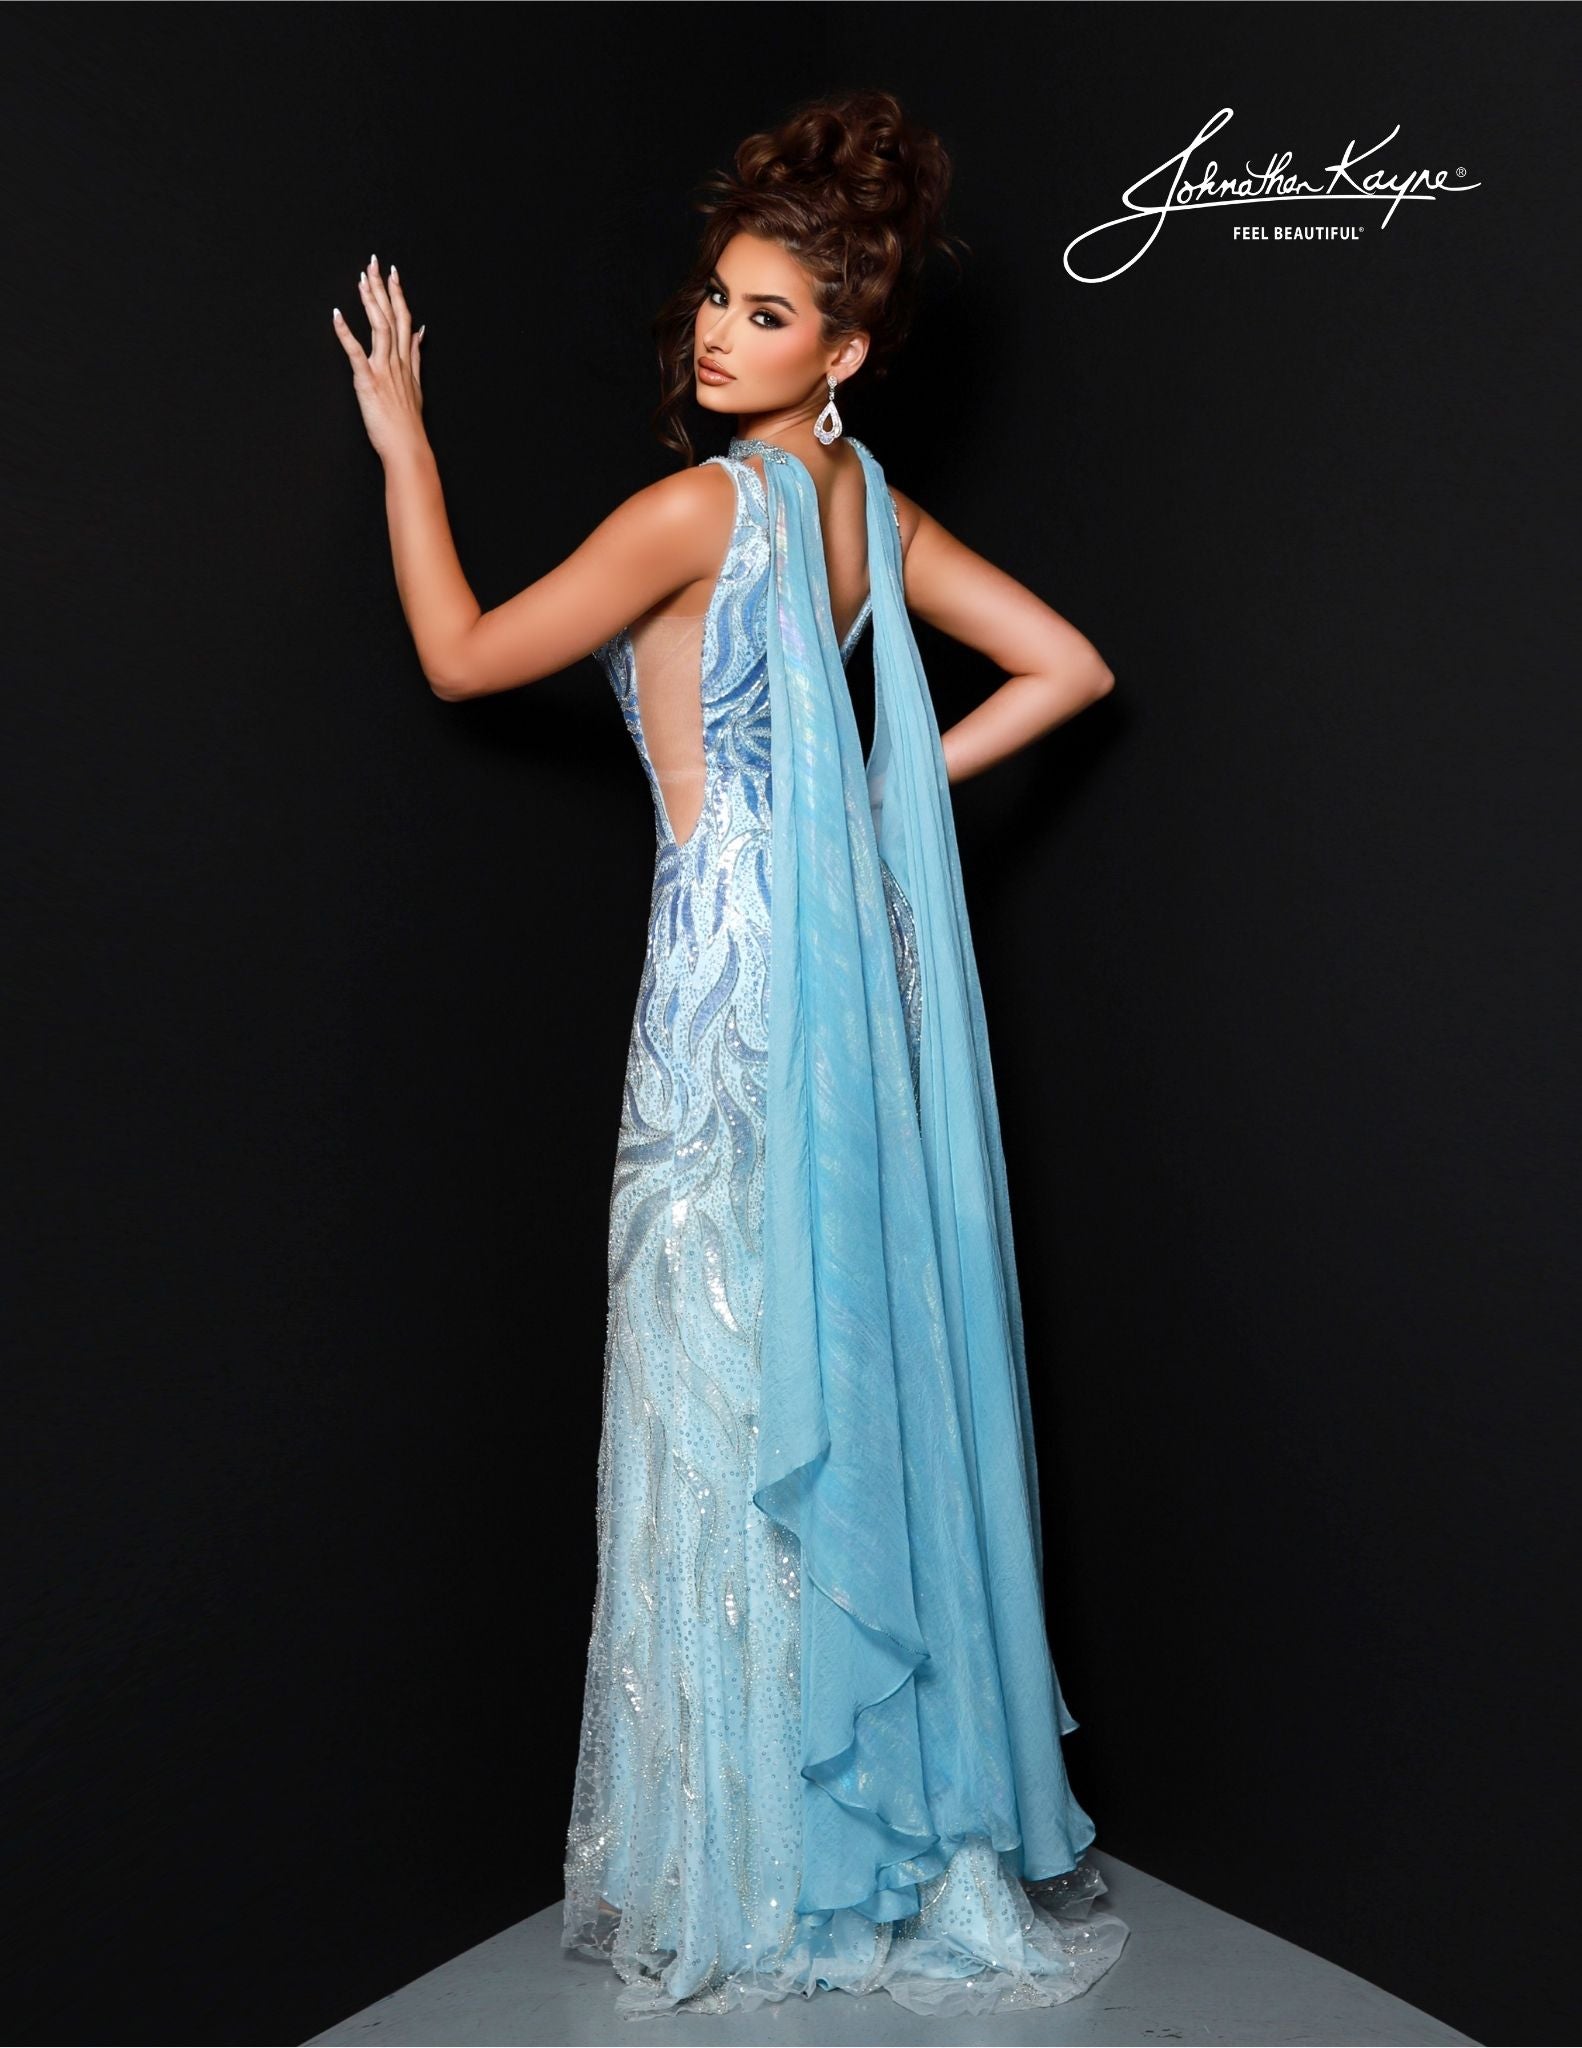 Johnathan Kayne's 2824 Long Prom Dress is perfect for a formal event. Crafted with a flattering mermaid silhouette and beaded choker cape, this elegant gown features a V-neckline, fitted waist and full-length hem. Ideal for pageants or proms. Drape yourself in luxury! This stunning gown features intricate beadwork on a mesh overlay, providing a captivating, shimmering effect. The detachable cape with choker adds a touch of drama and sophistication.